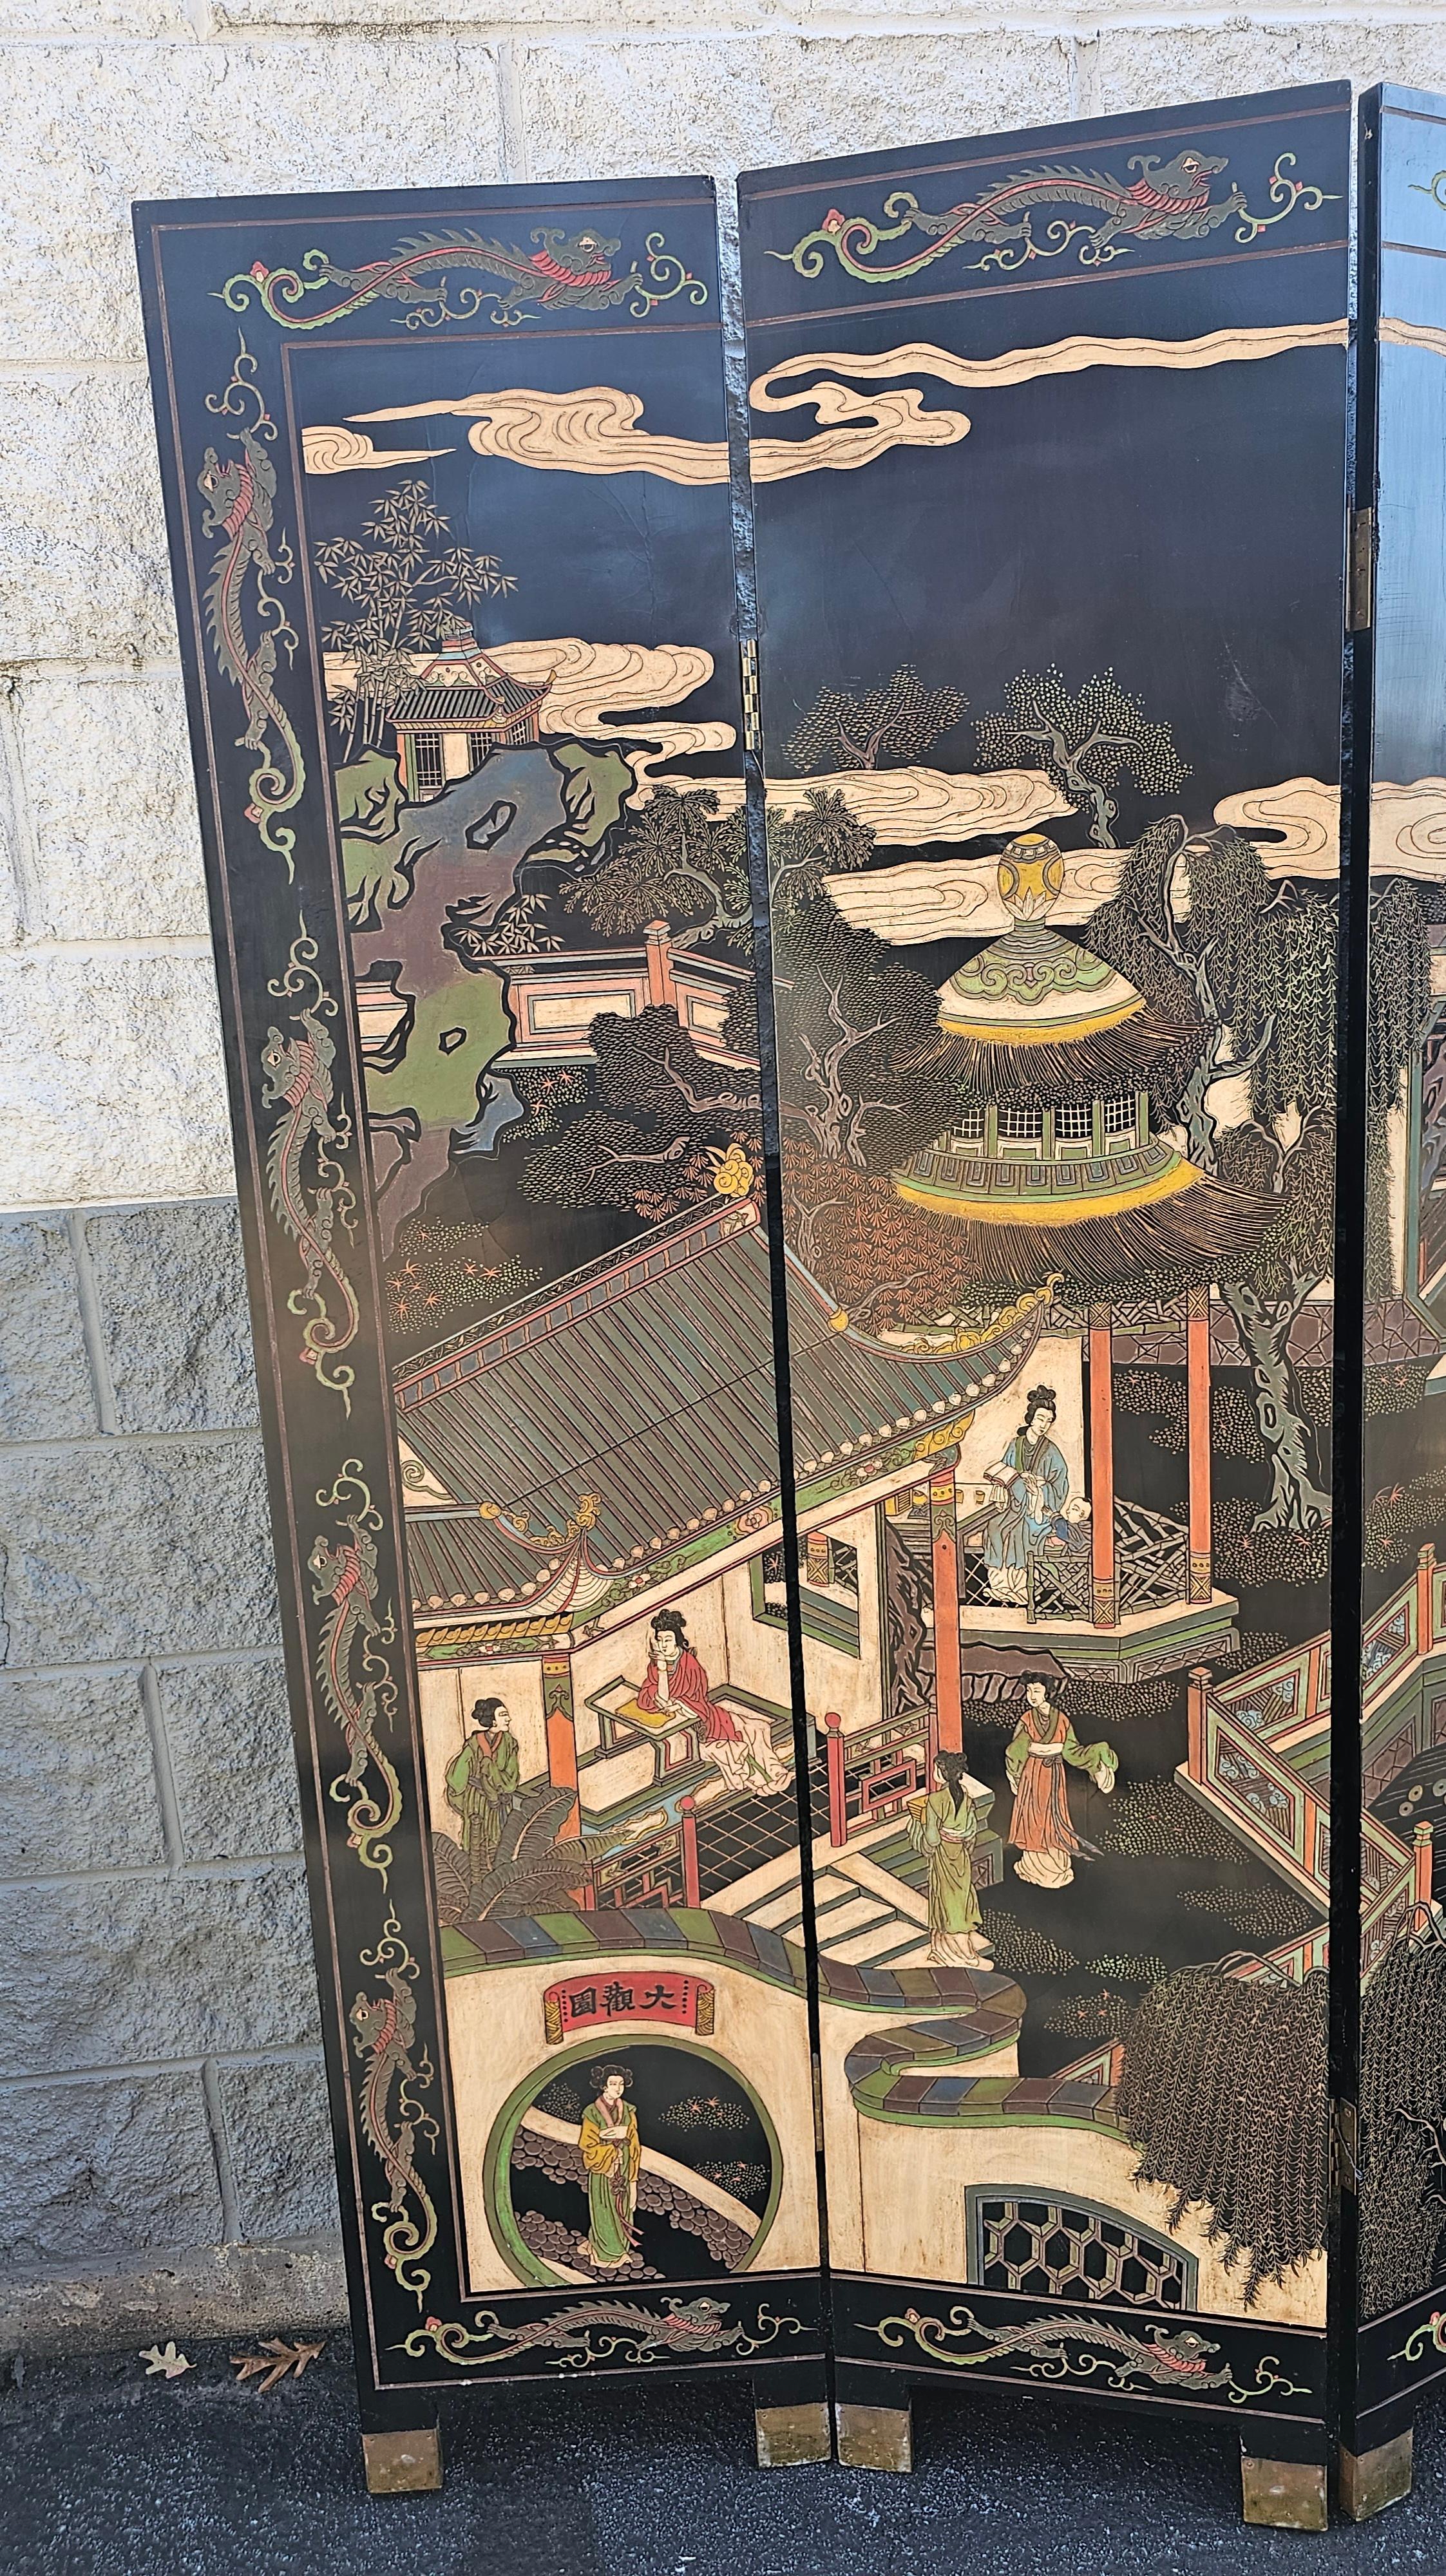 A Mid-20th Century Chinese Coromandel Etched and Painted Six-Fold Floor Screen screen or room divider. Exclusively made by Imperial East New York
Measures 96